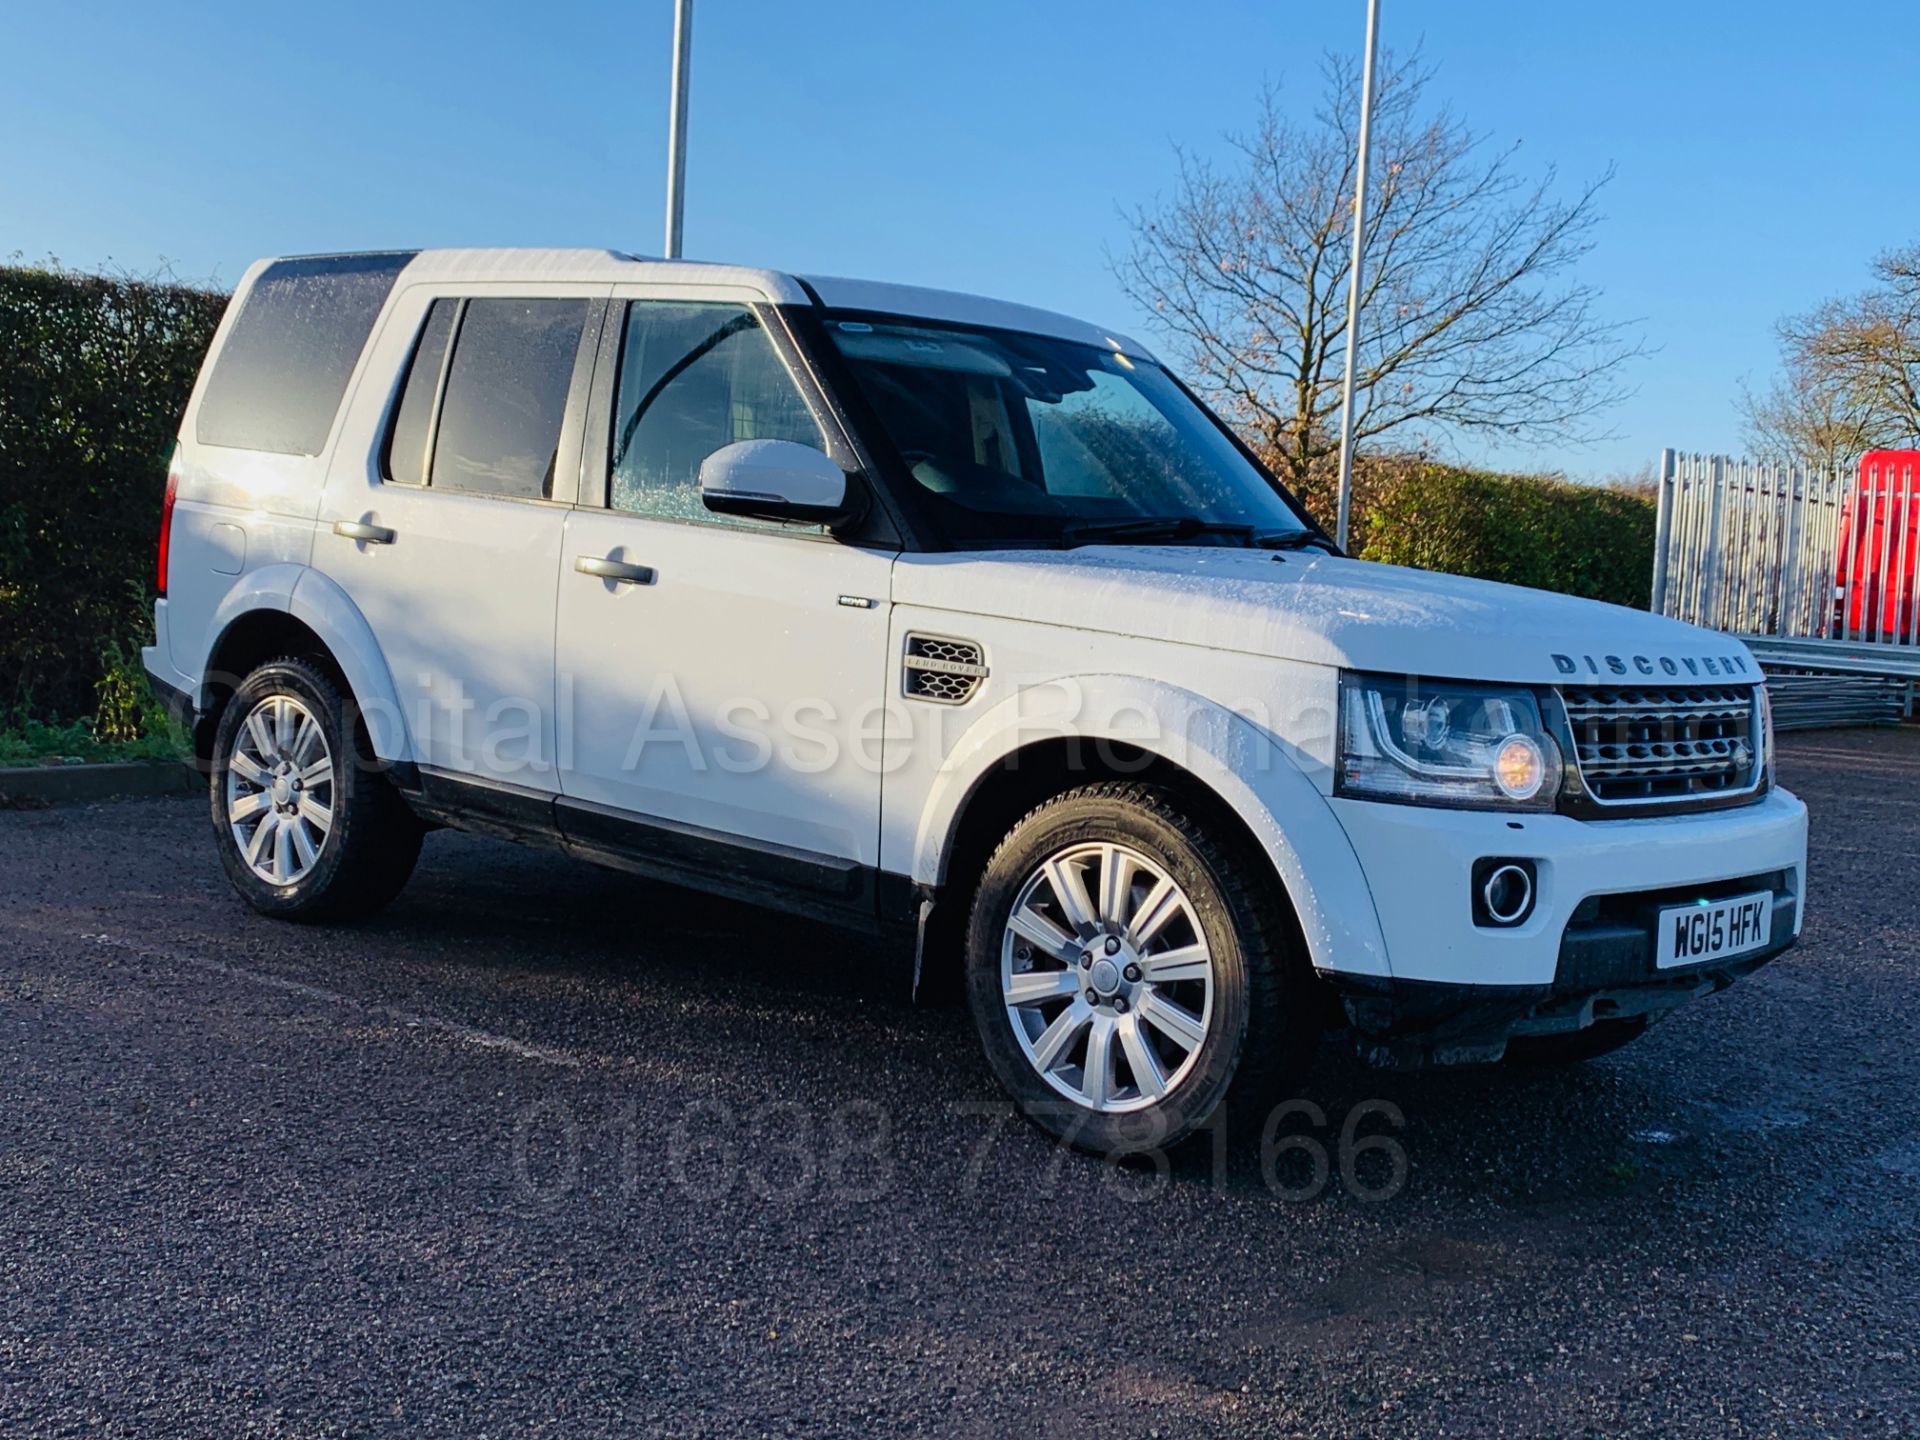 LAND ROVER DISCOVERY 4 *XS EDITION* (2015) '3.0 SDV6 - 8 SPEED AUTO' *LEATHER & SAT NAV* *HUGE SPEC* - Image 10 of 47